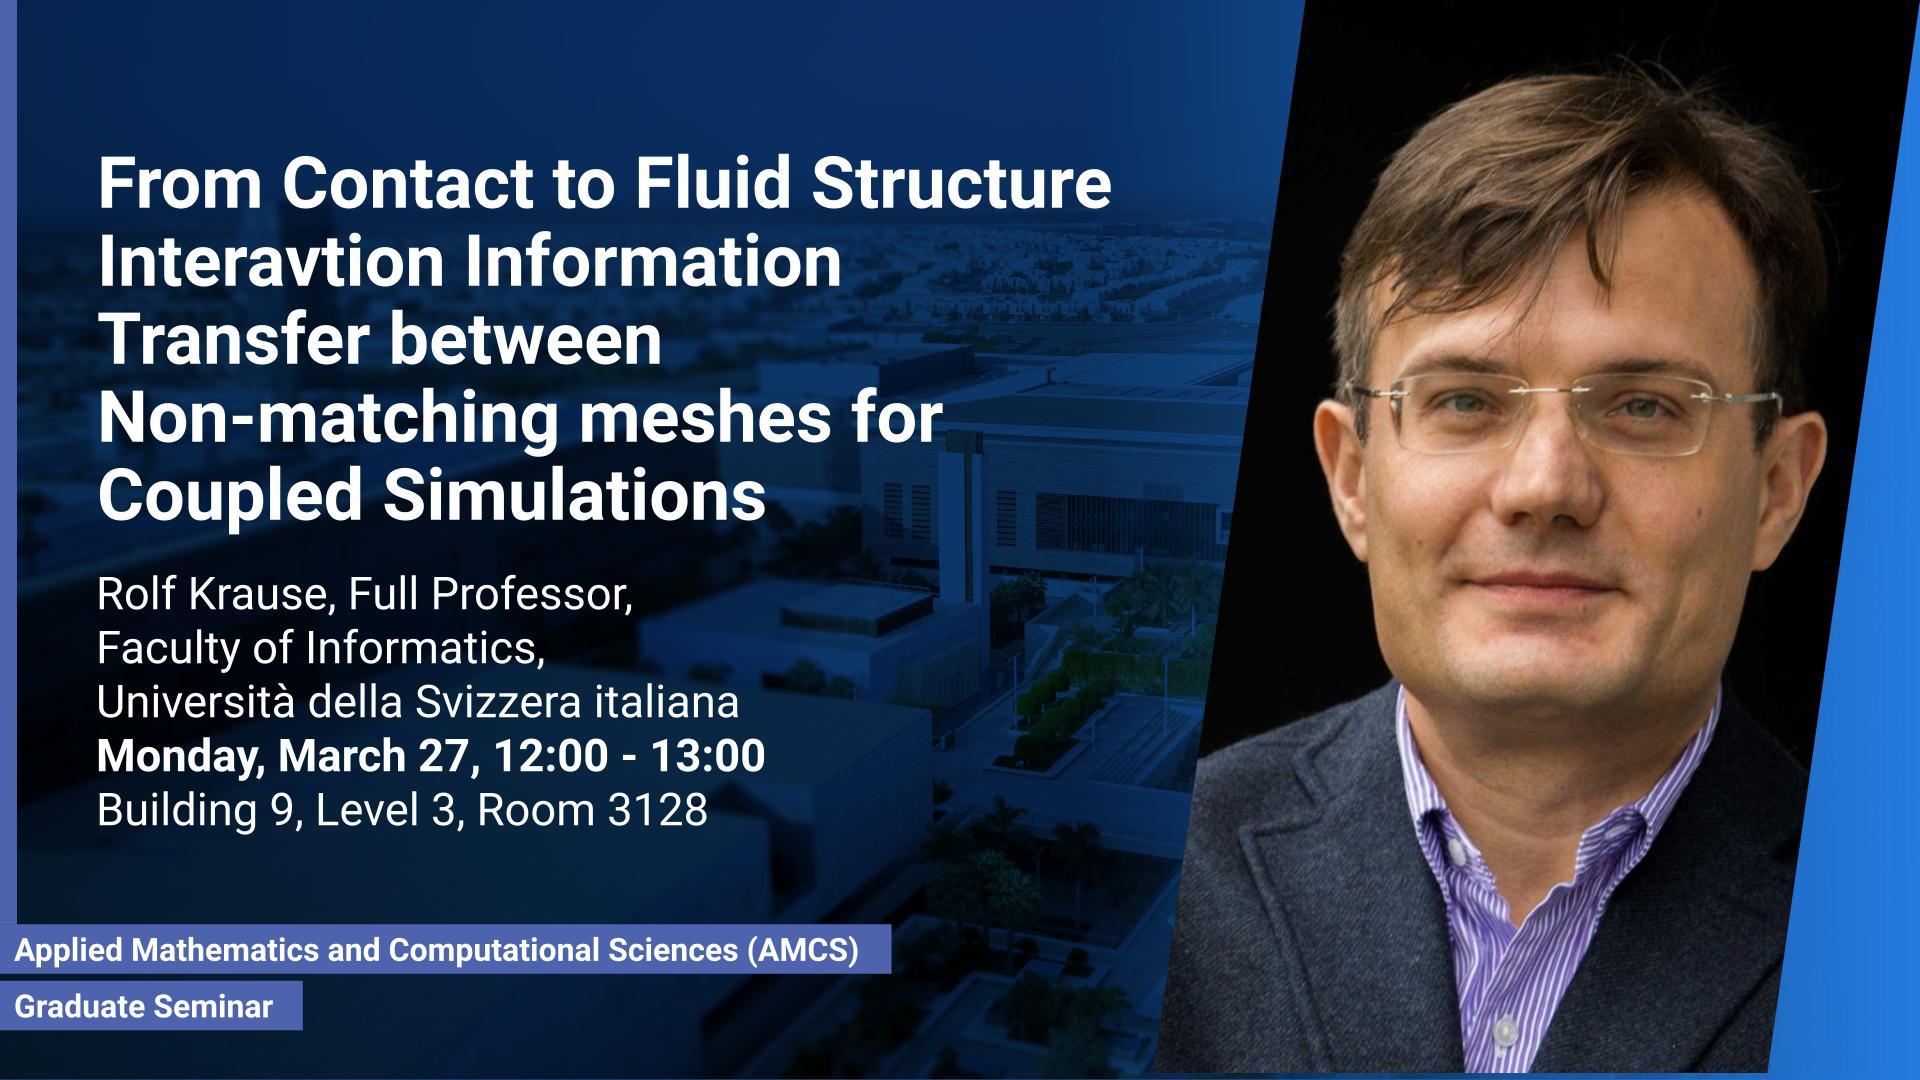 KAUST-CEMSE-AMCS-Graduate-Seminar-From-Contact-to-Fluid-Structure-Interavtion-Information-Rolf-Krause